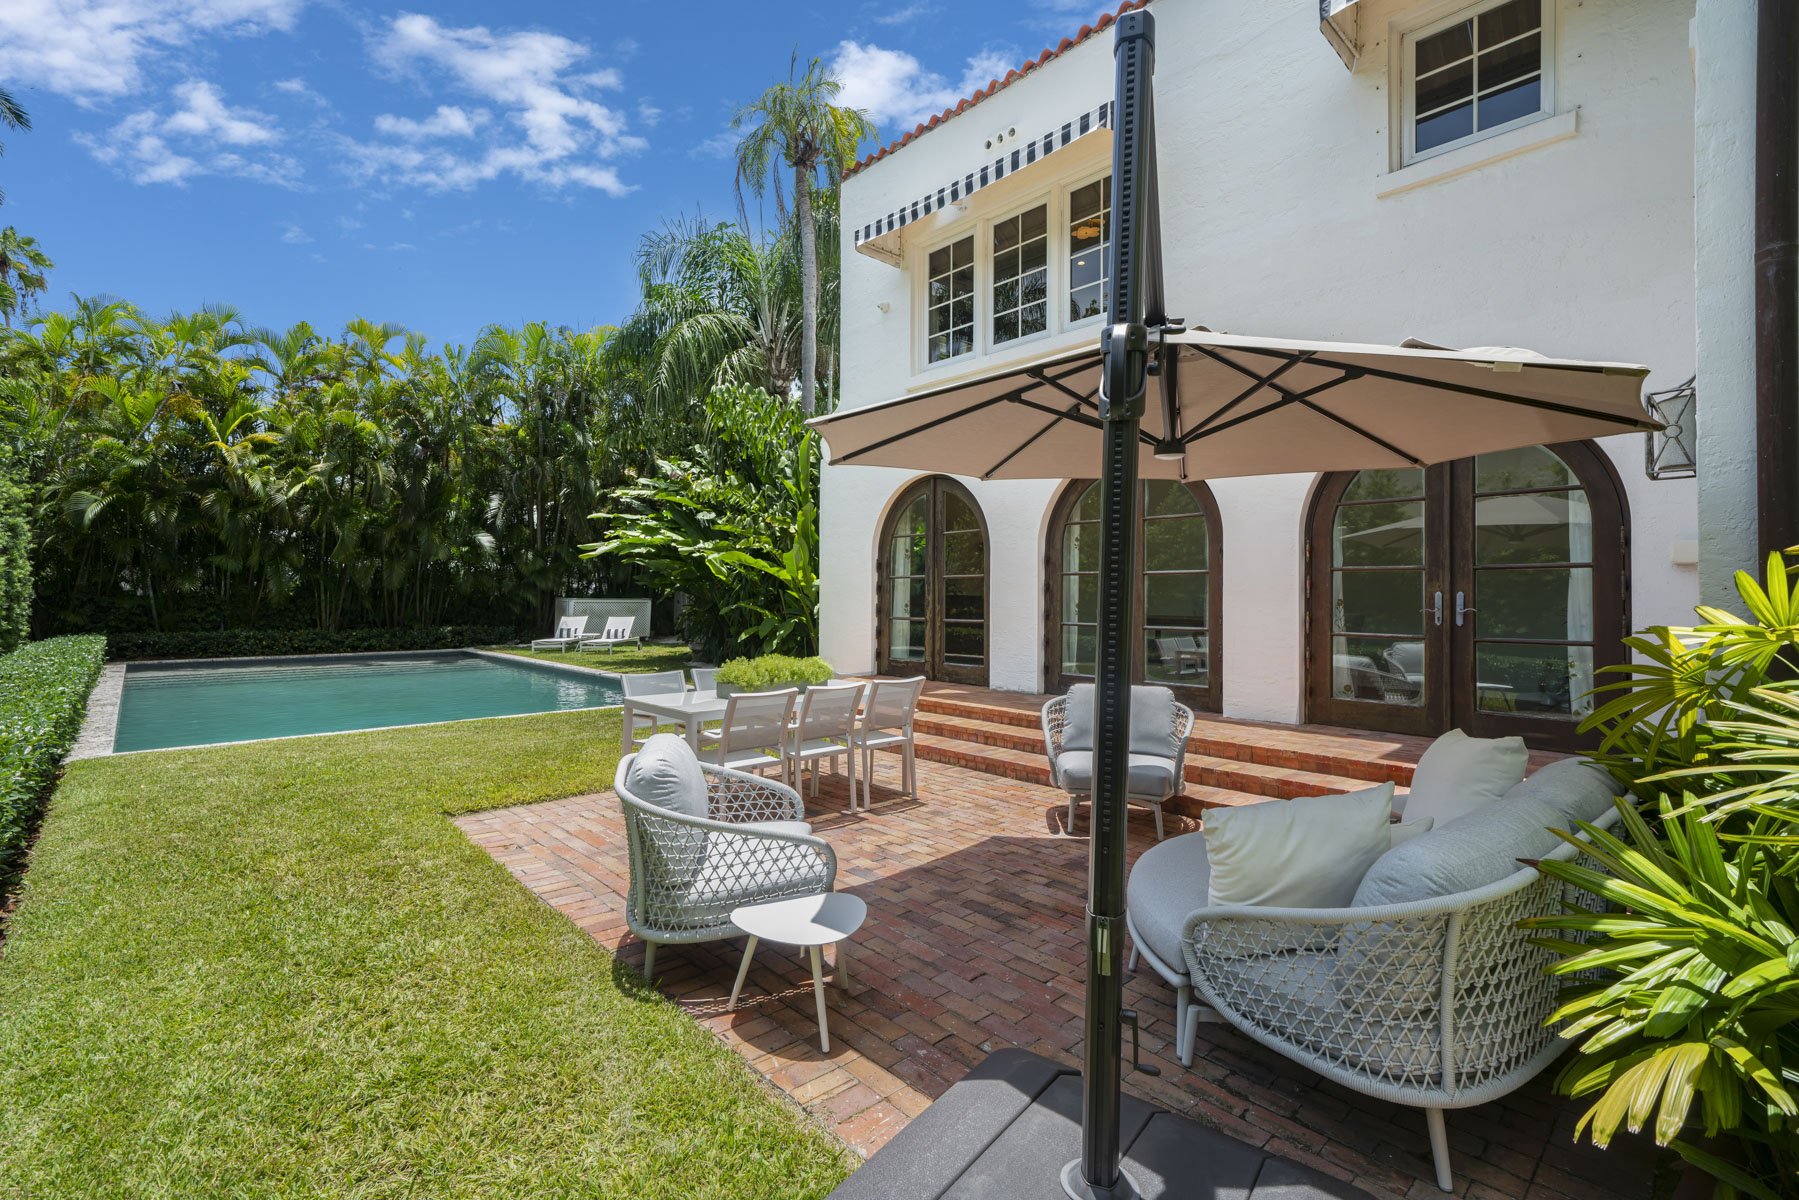 Actor And Producer Christian Slater Sells Classic Coconut Grove Home For $4.258 Million 35.jpg